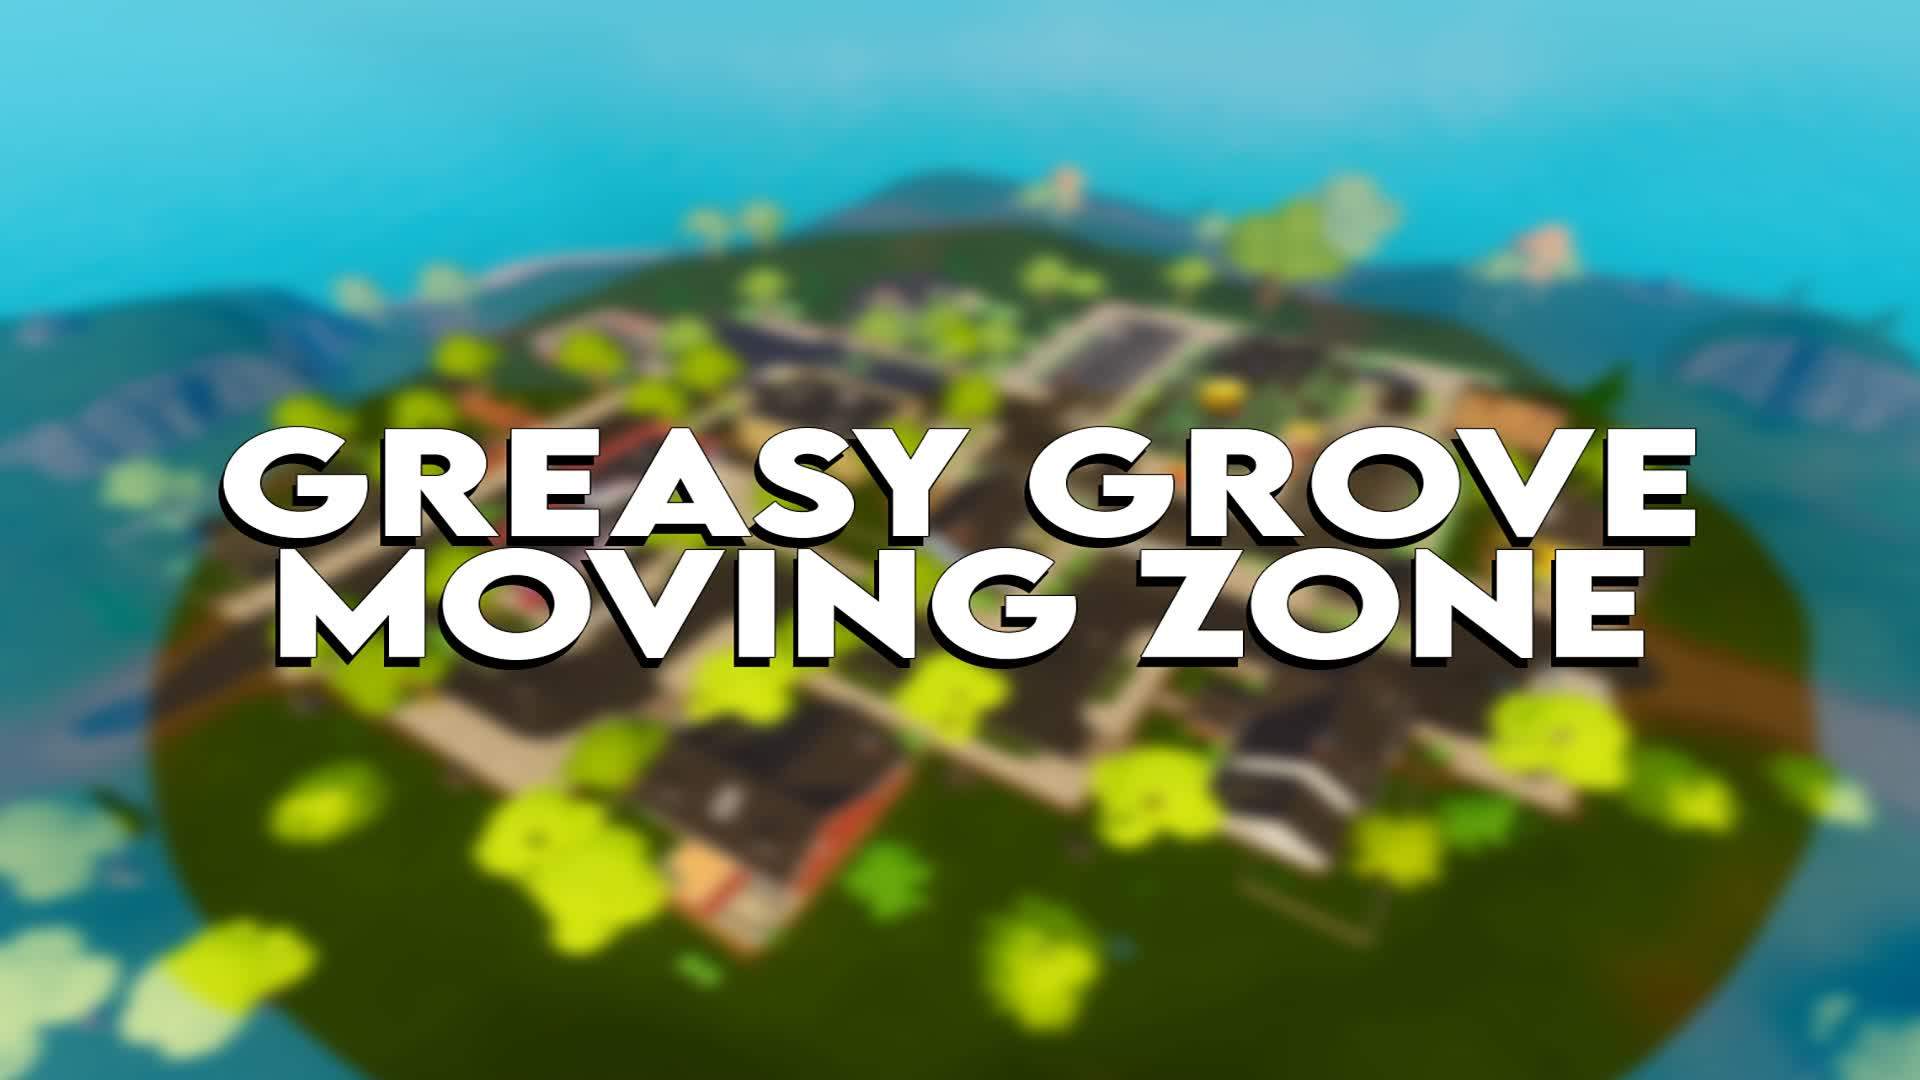 GREASY GROVE MOVING STORM